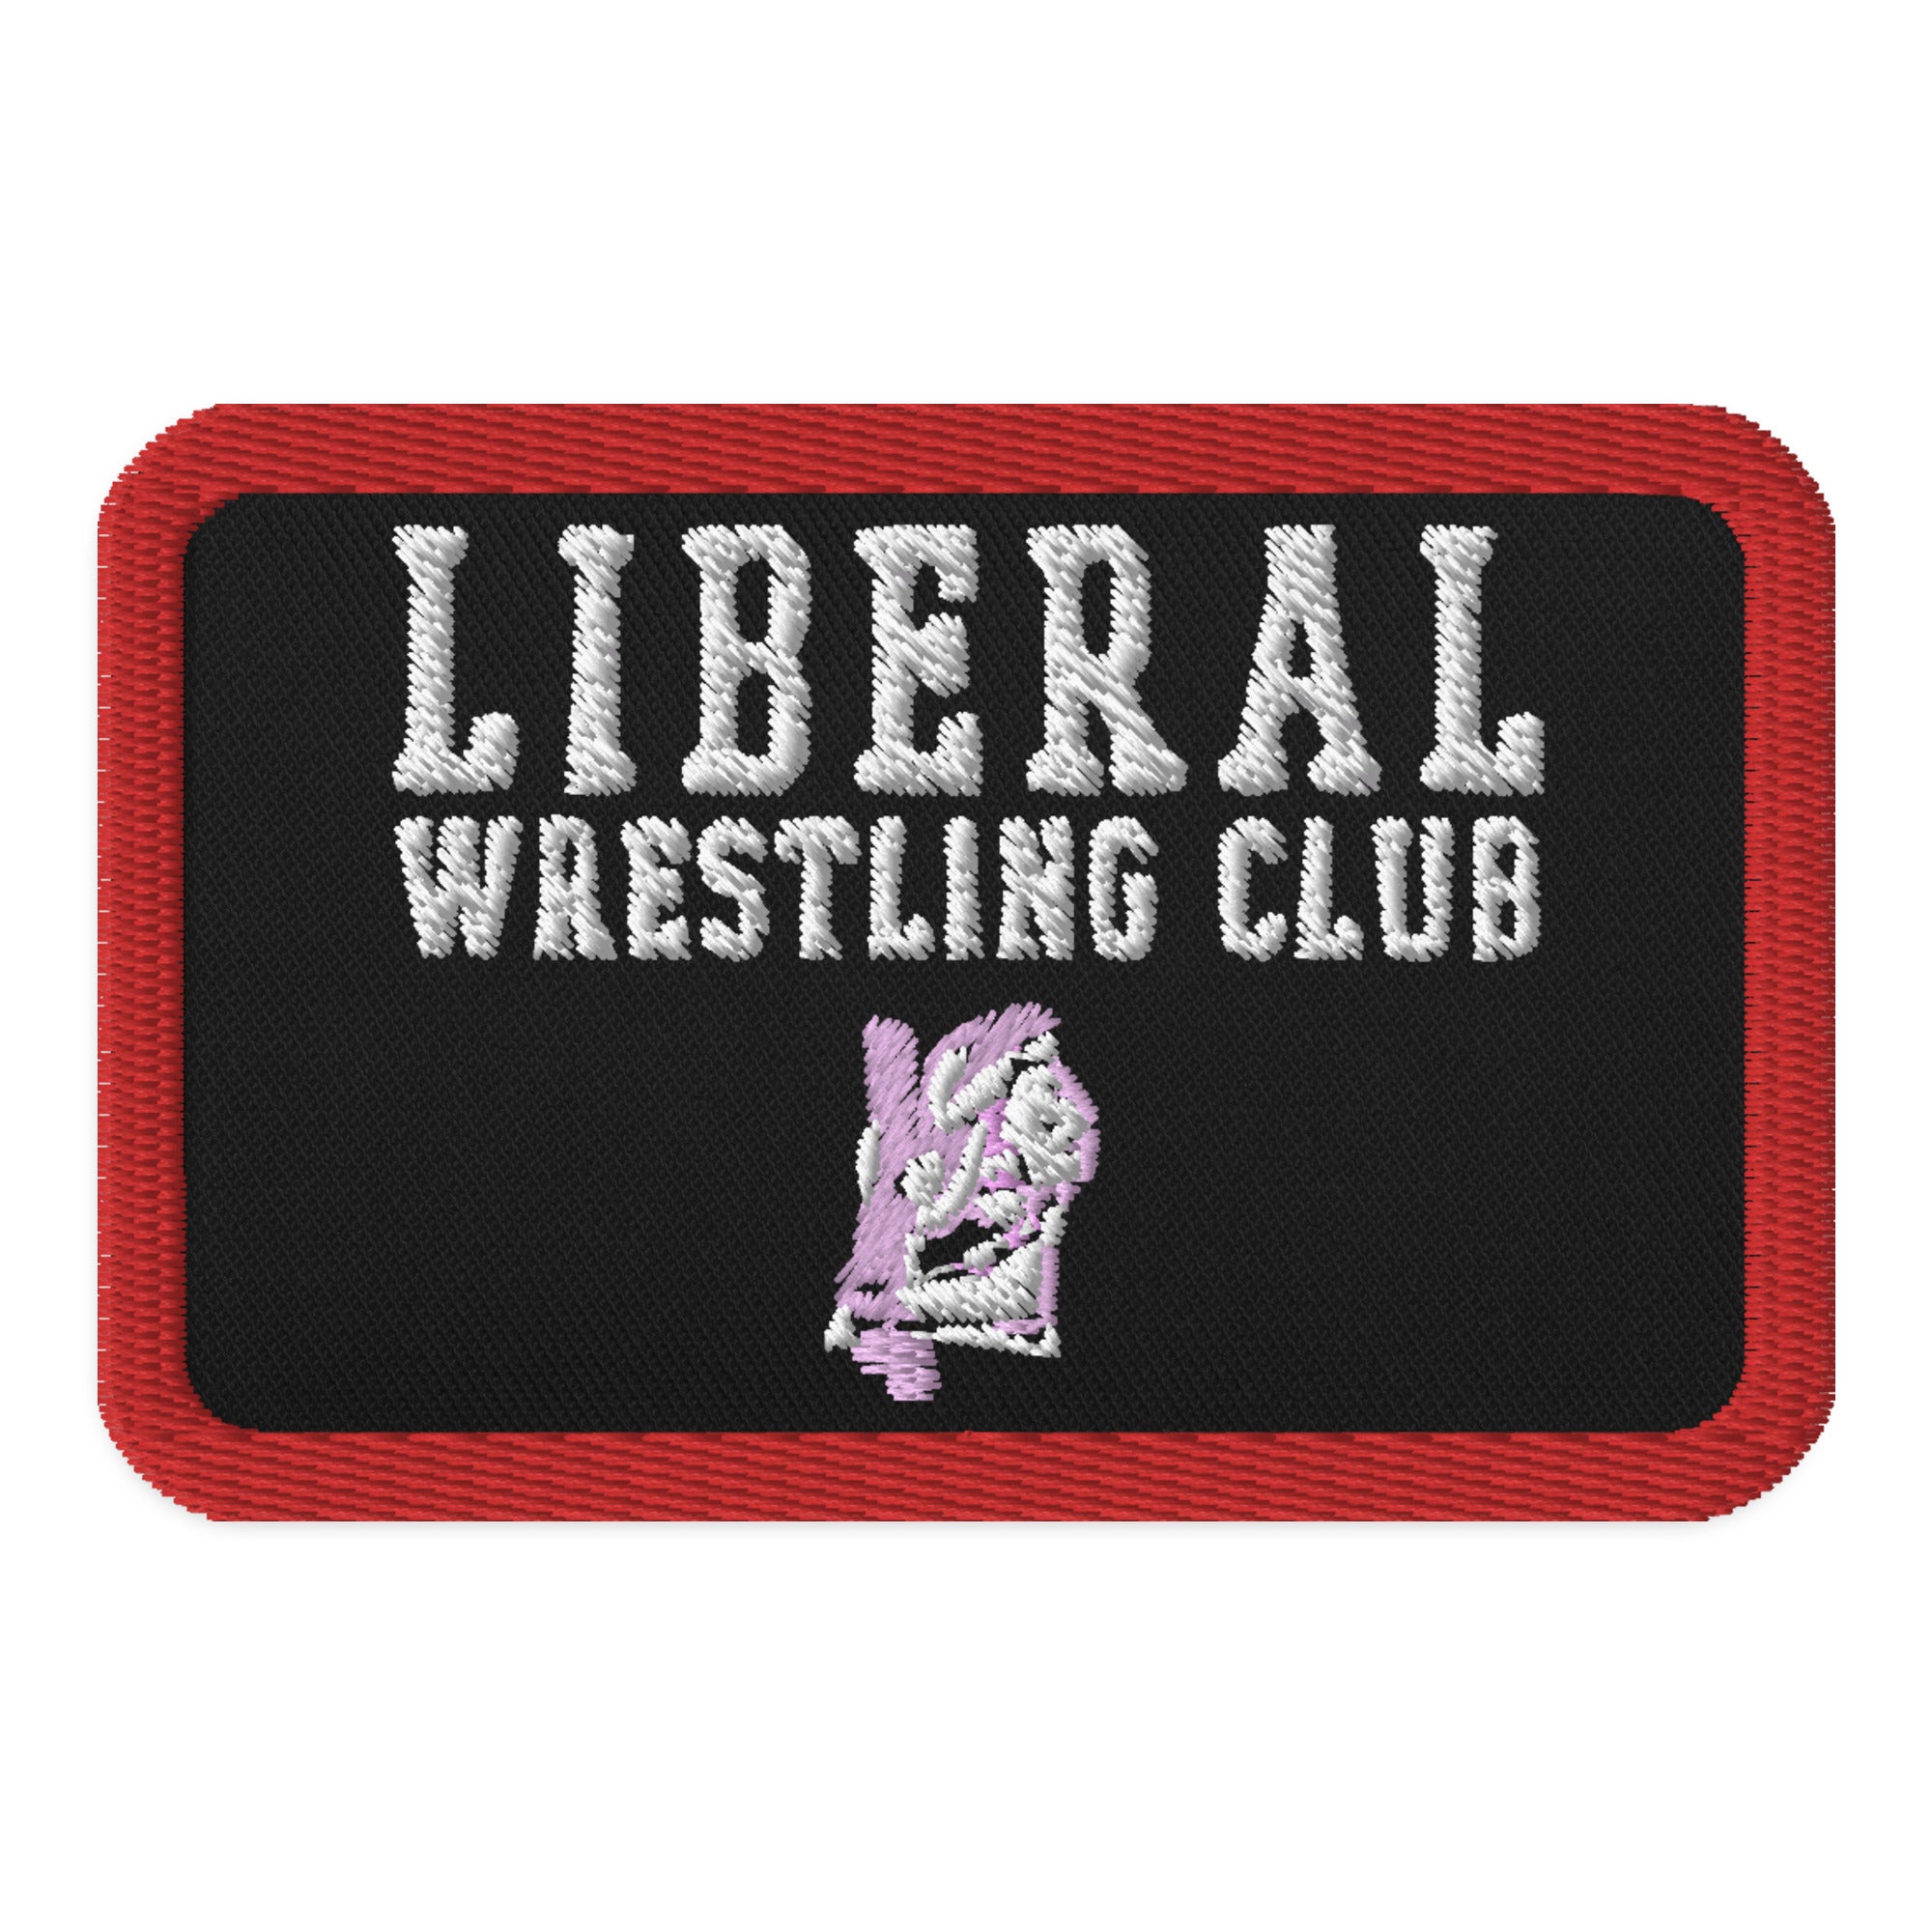 Liberal Wrestling Club, Embroidered Patches